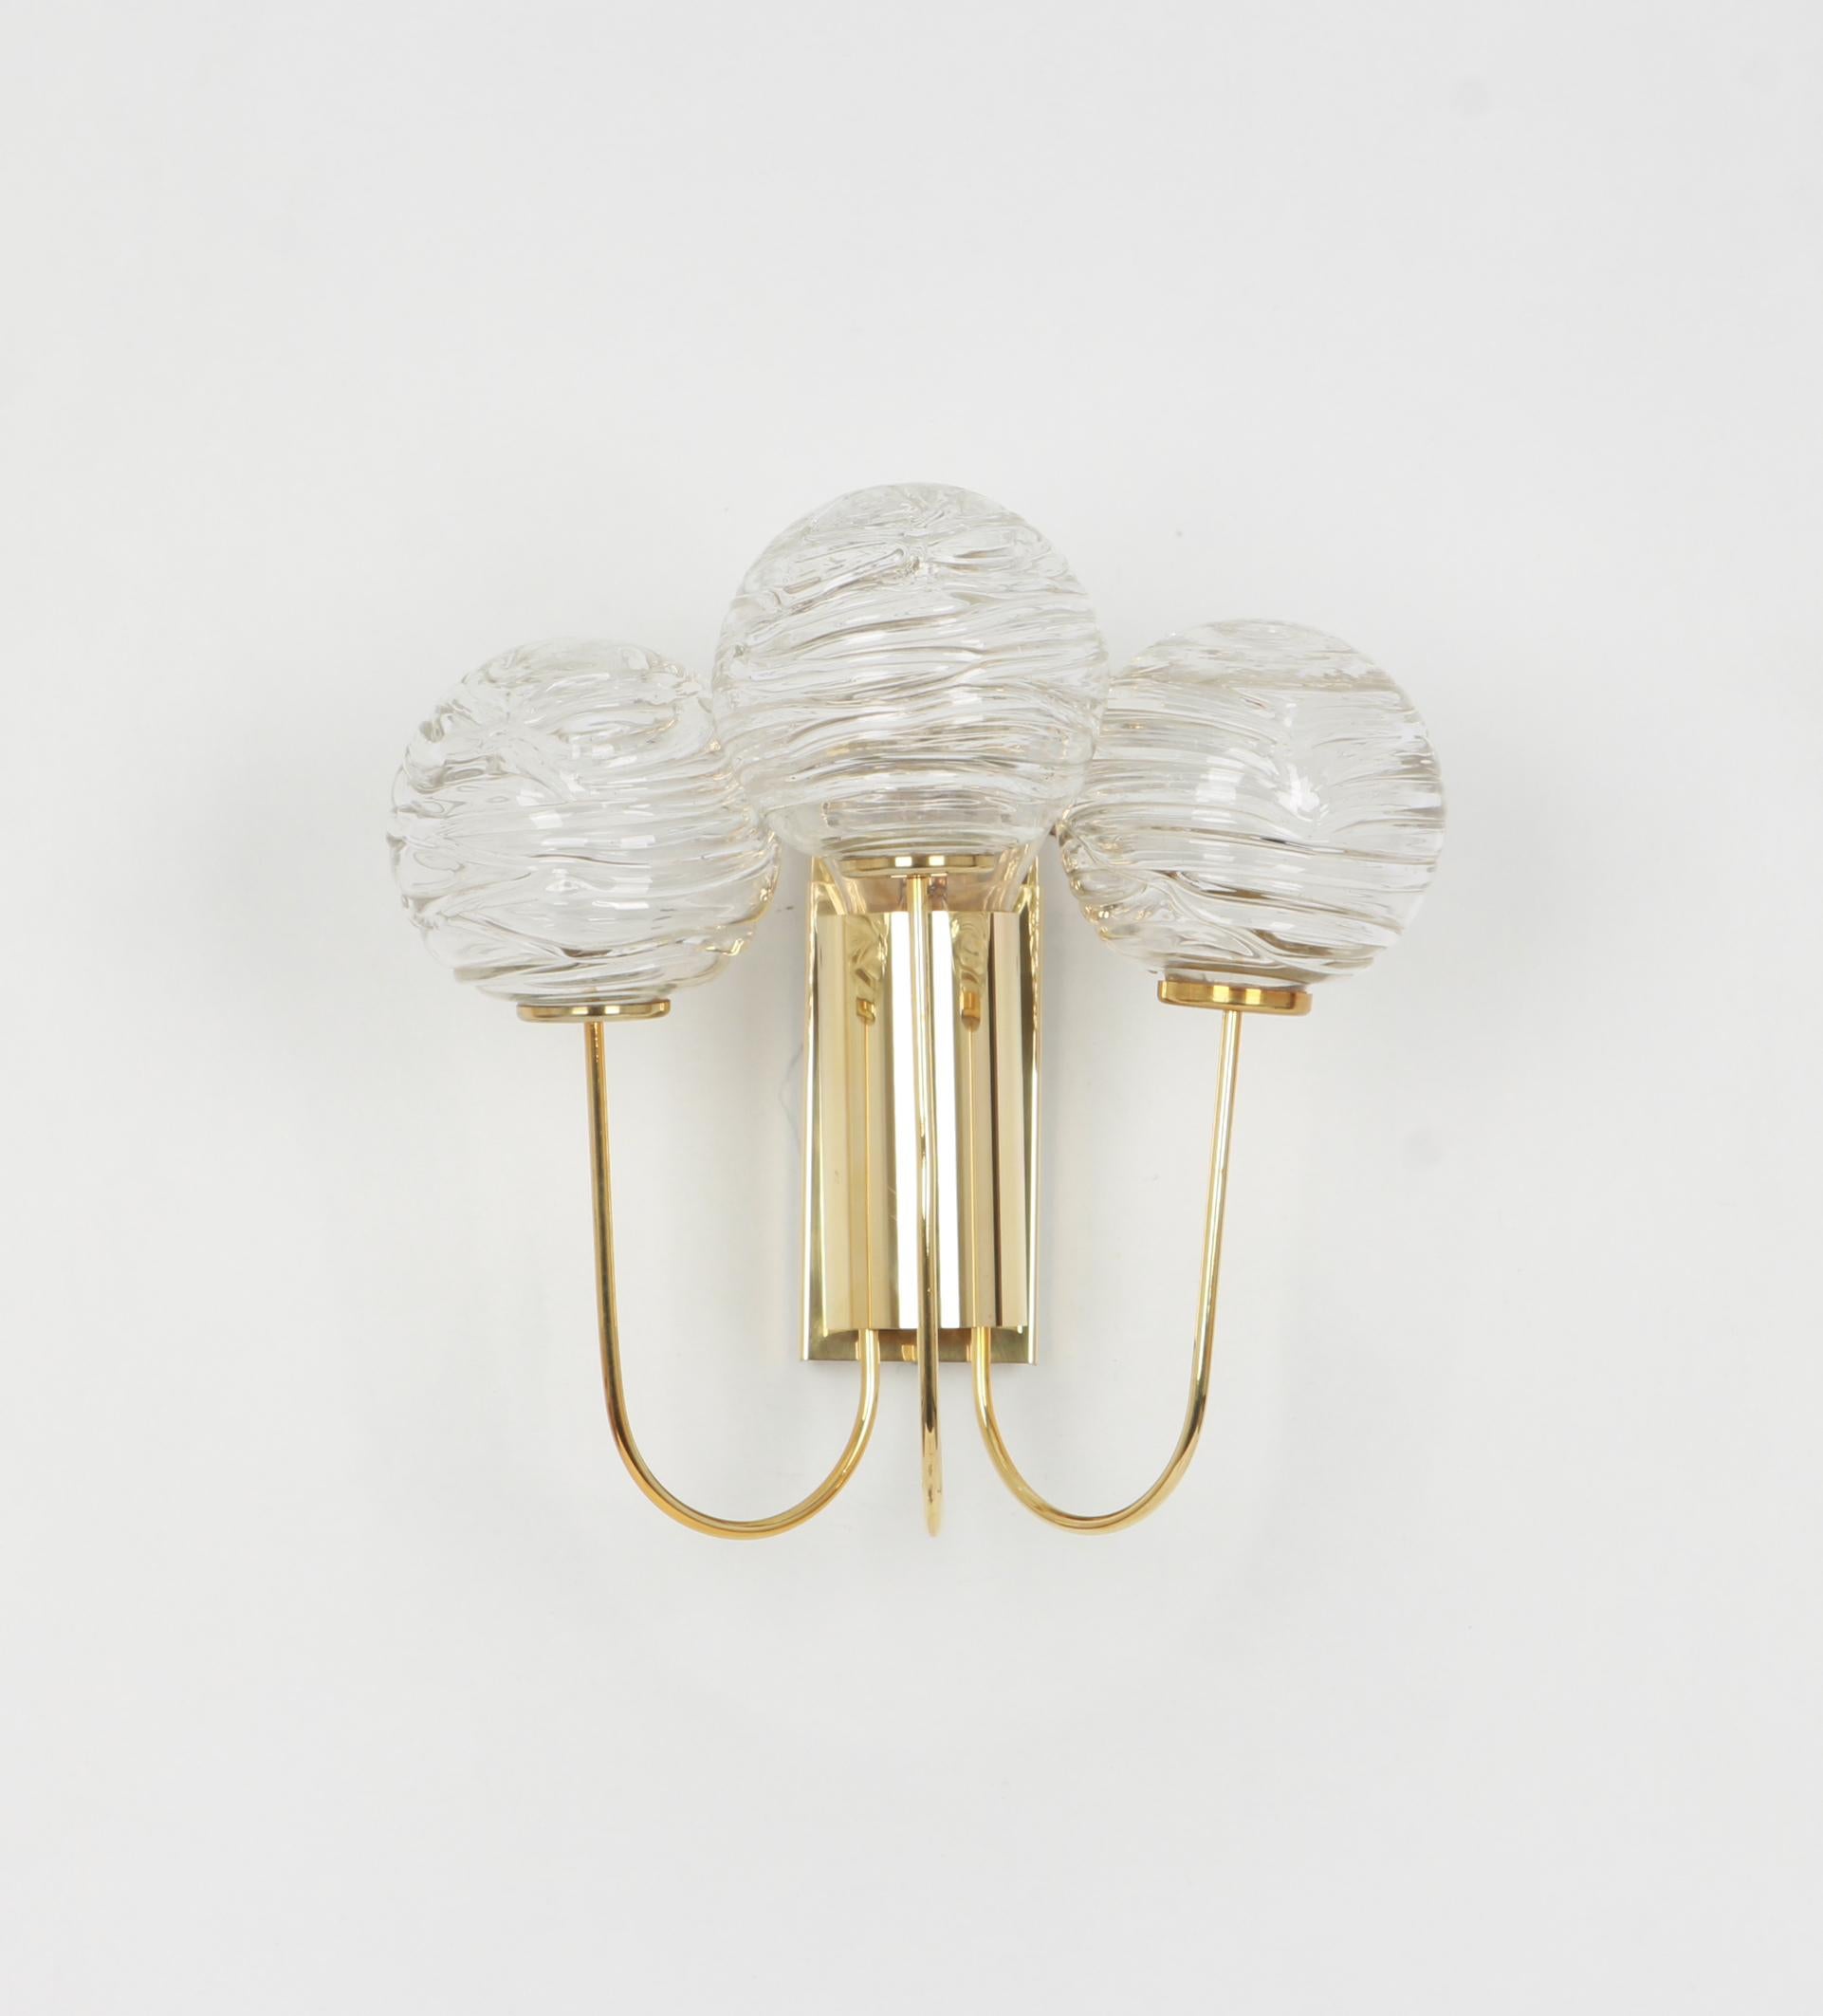 Wonderful pair of midcentury rare wall sconces with Murano glass balls, made by Doria Leuchten, Germany, manufactured, circa 1960-1969.


High quality and in very good condition. Cleaned, well-wired and ready to use. 

Each sconce requires 1 x